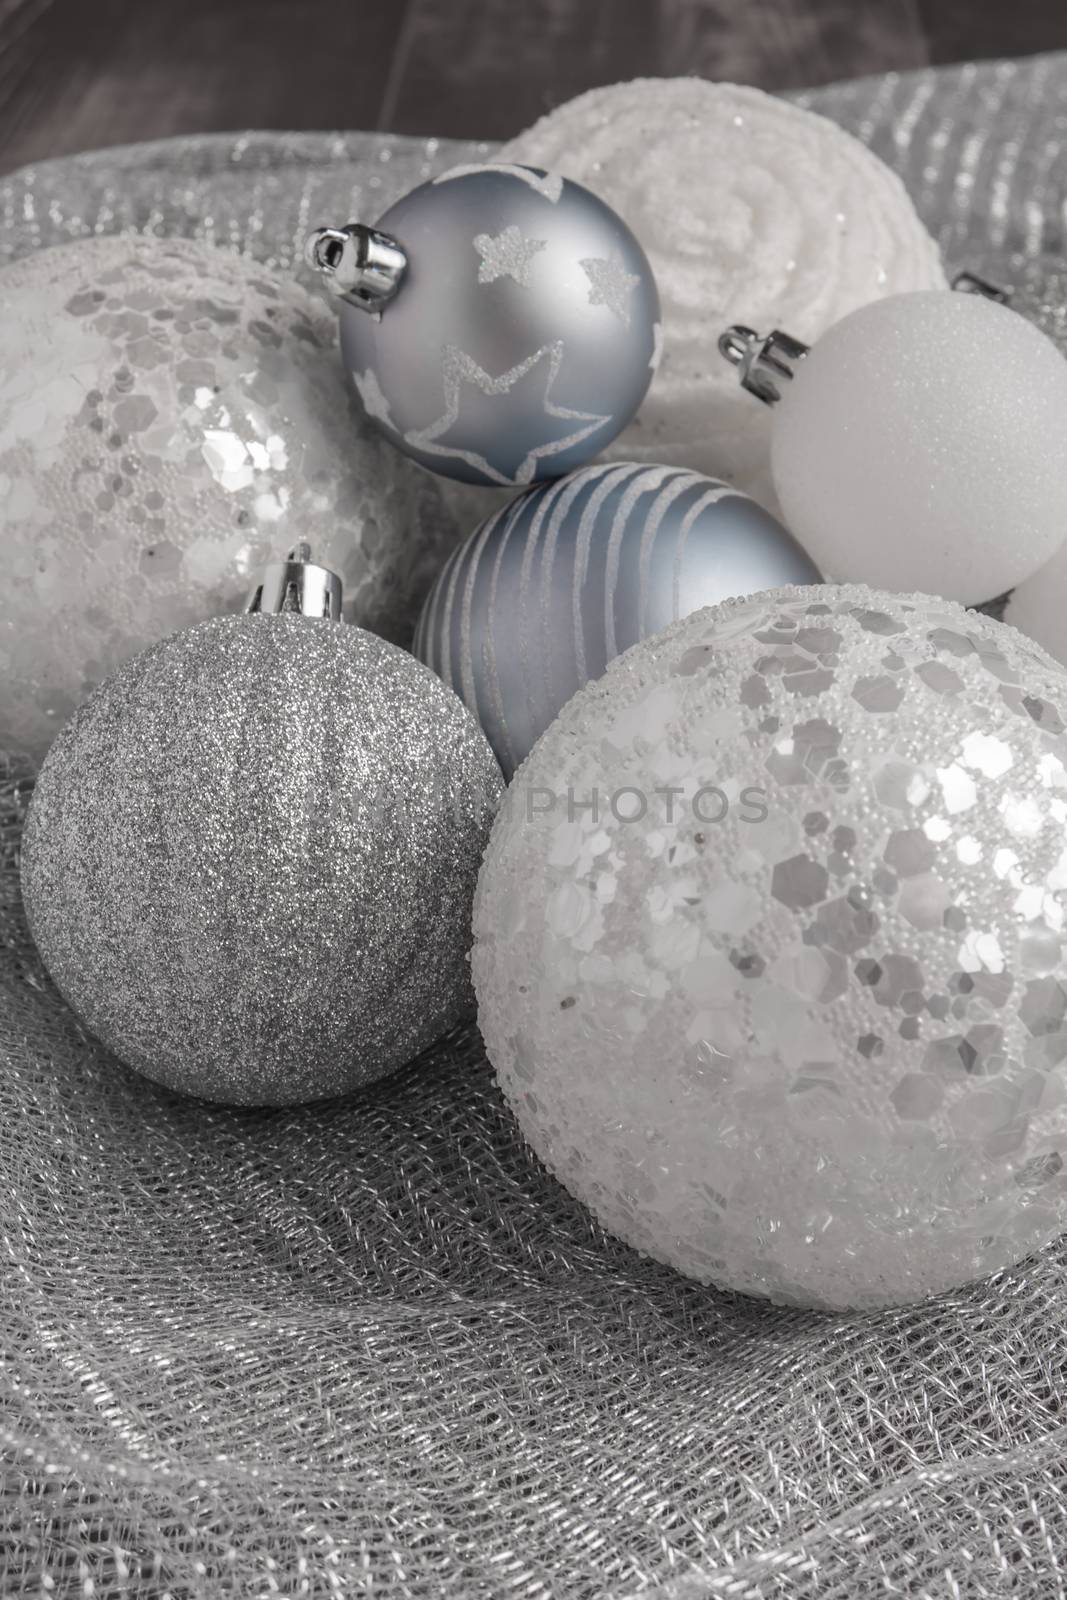 Festive glitter christmas balls decorations by AnaMarques